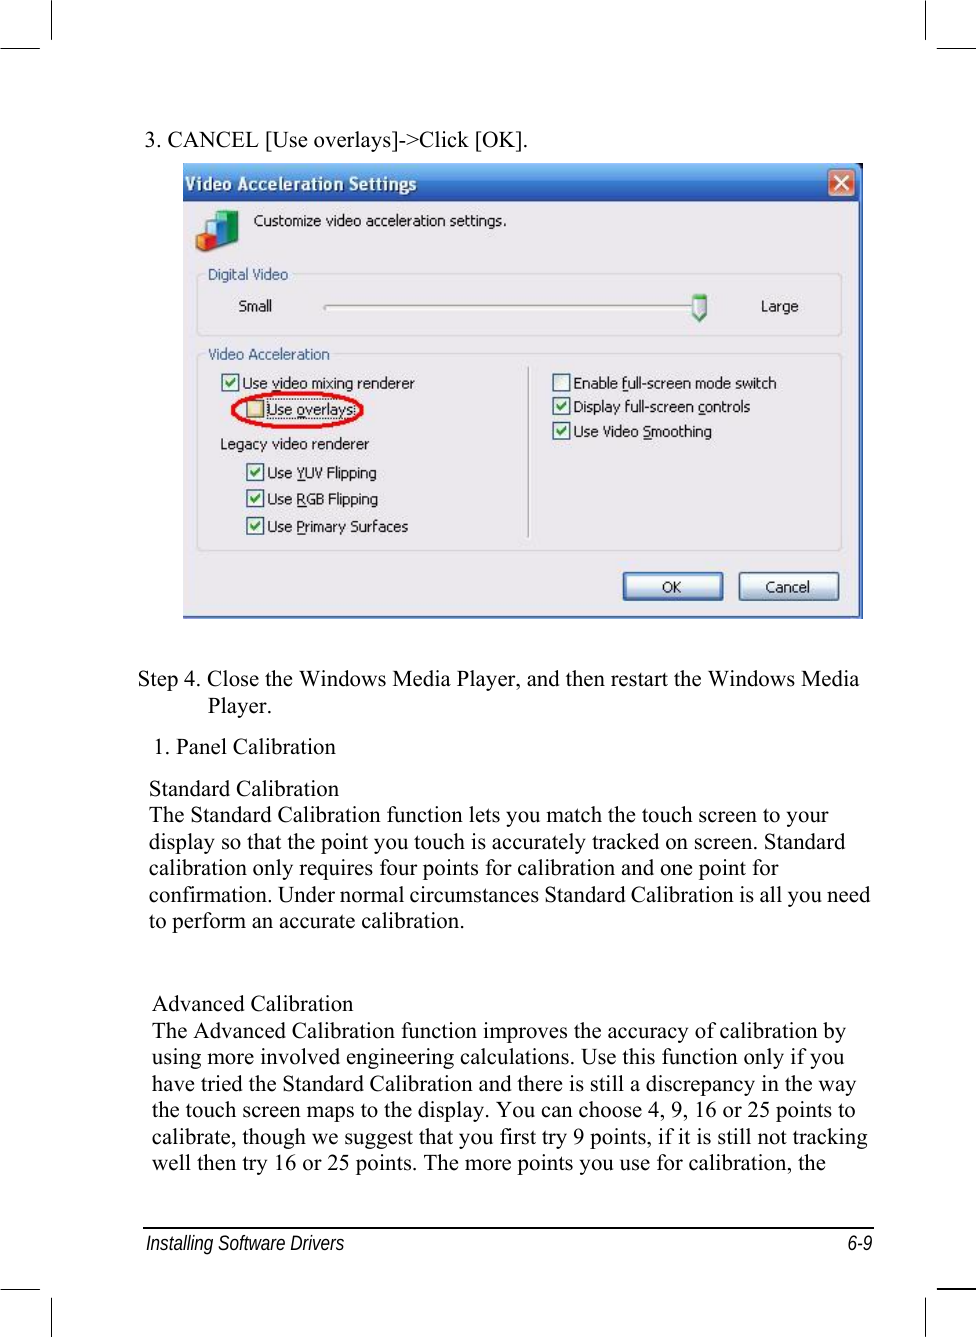  Installing Software Drivers  6-9 3. CANCEL [Use overlays]-&gt;Click [OK].             Step 4. Close the Windows Media Player, and then restart the Windows Media Player. 1. Panel Calibration Standard Calibration The Standard Calibration function lets you match the touch screen to your display so that the point you touch is accurately tracked on screen. Standard calibration only requires four points for calibration and one point for confirmation. Under normal circumstances Standard Calibration is all you need to perform an accurate calibration.   Advanced Calibration The Advanced Calibration function improves the accuracy of calibration by using more involved engineering calculations. Use this function only if you have tried the Standard Calibration and there is still a discrepancy in the way the touch screen maps to the display. You can choose 4, 9, 16 or 25 points to calibrate, though we suggest that you first try 9 points, if it is still not tracking well then try 16 or 25 points. The more points you use for calibration, the 